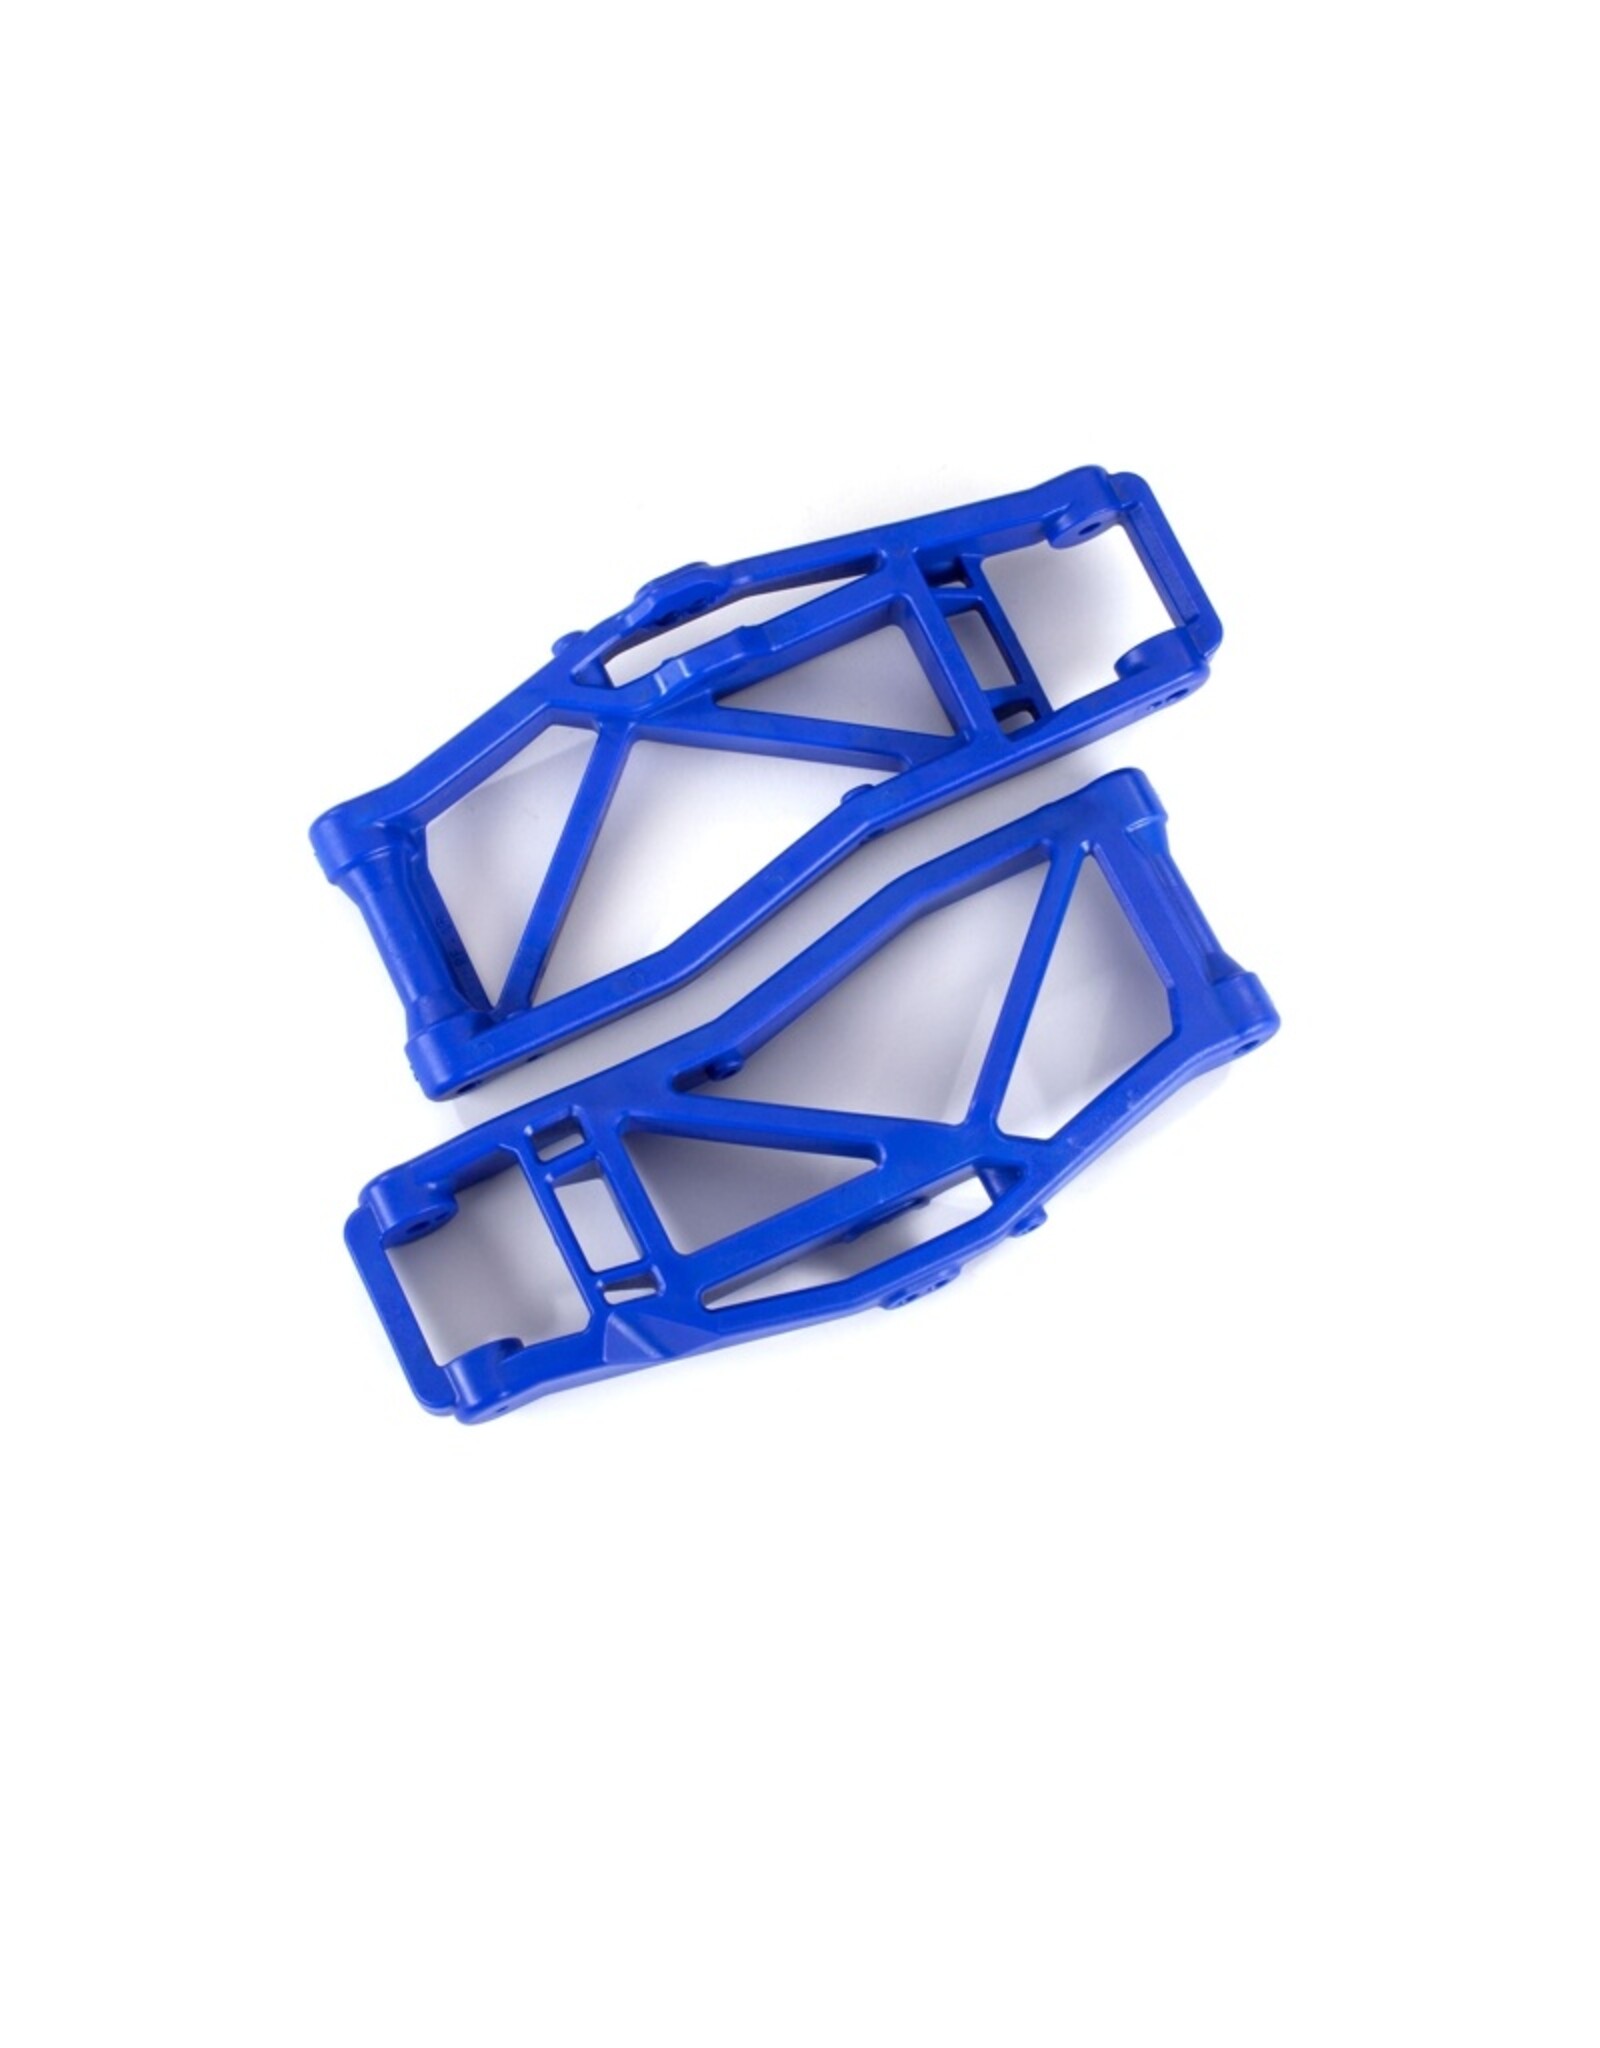 Traxxas TRA8999X - Suspension arms, lower, blue (left and right, front or rear) (2) (for use with #8995 WideMaxx™ suspension kit)